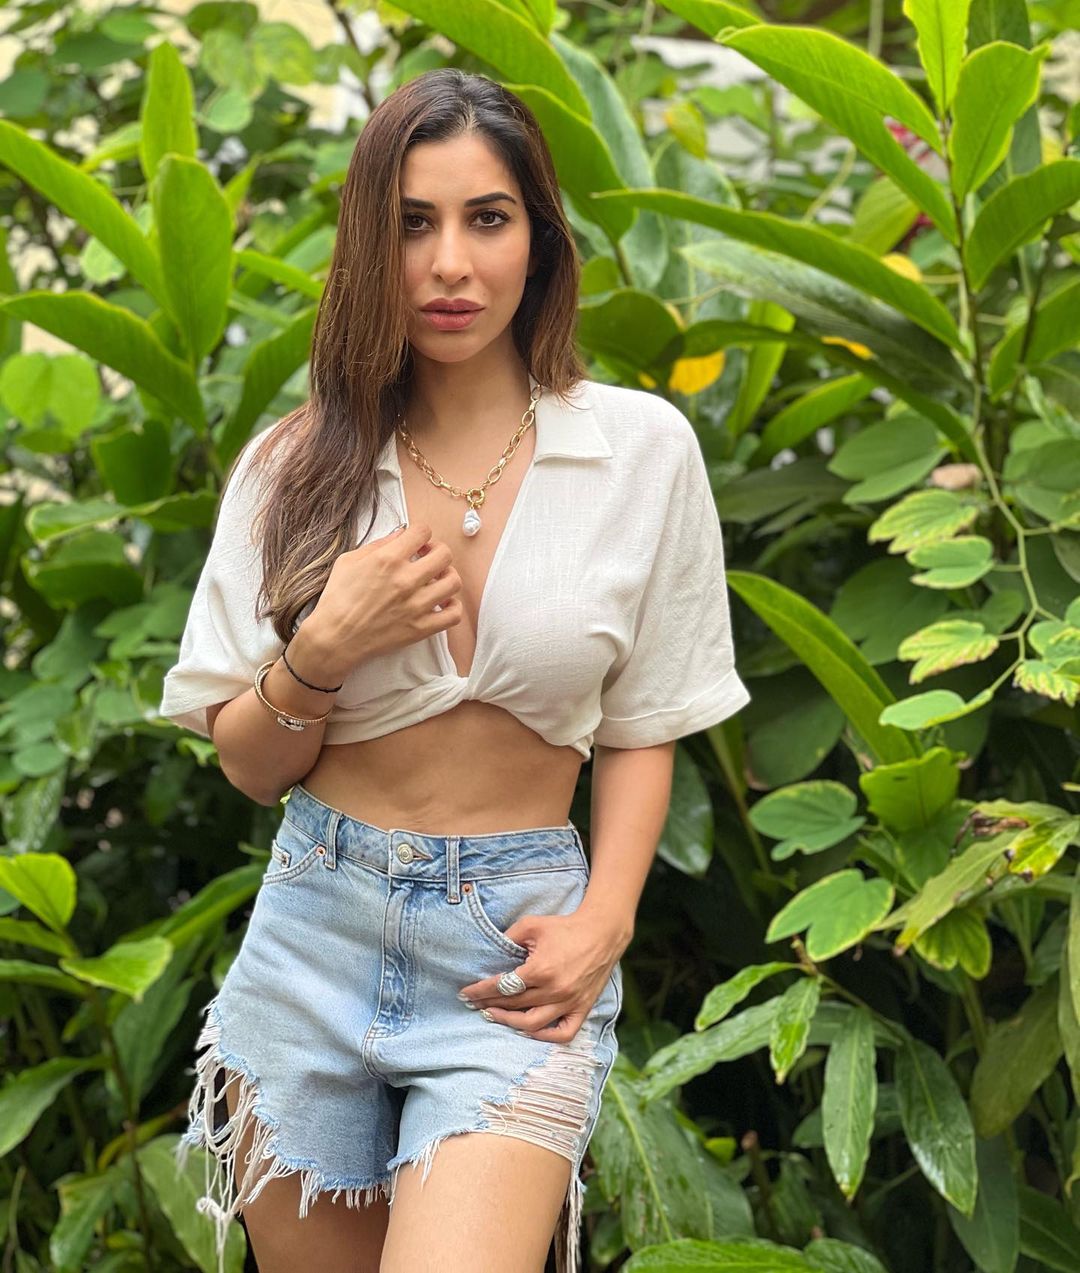 Sophie Choudry is flaunting her washboard abs in her latest photos on social media